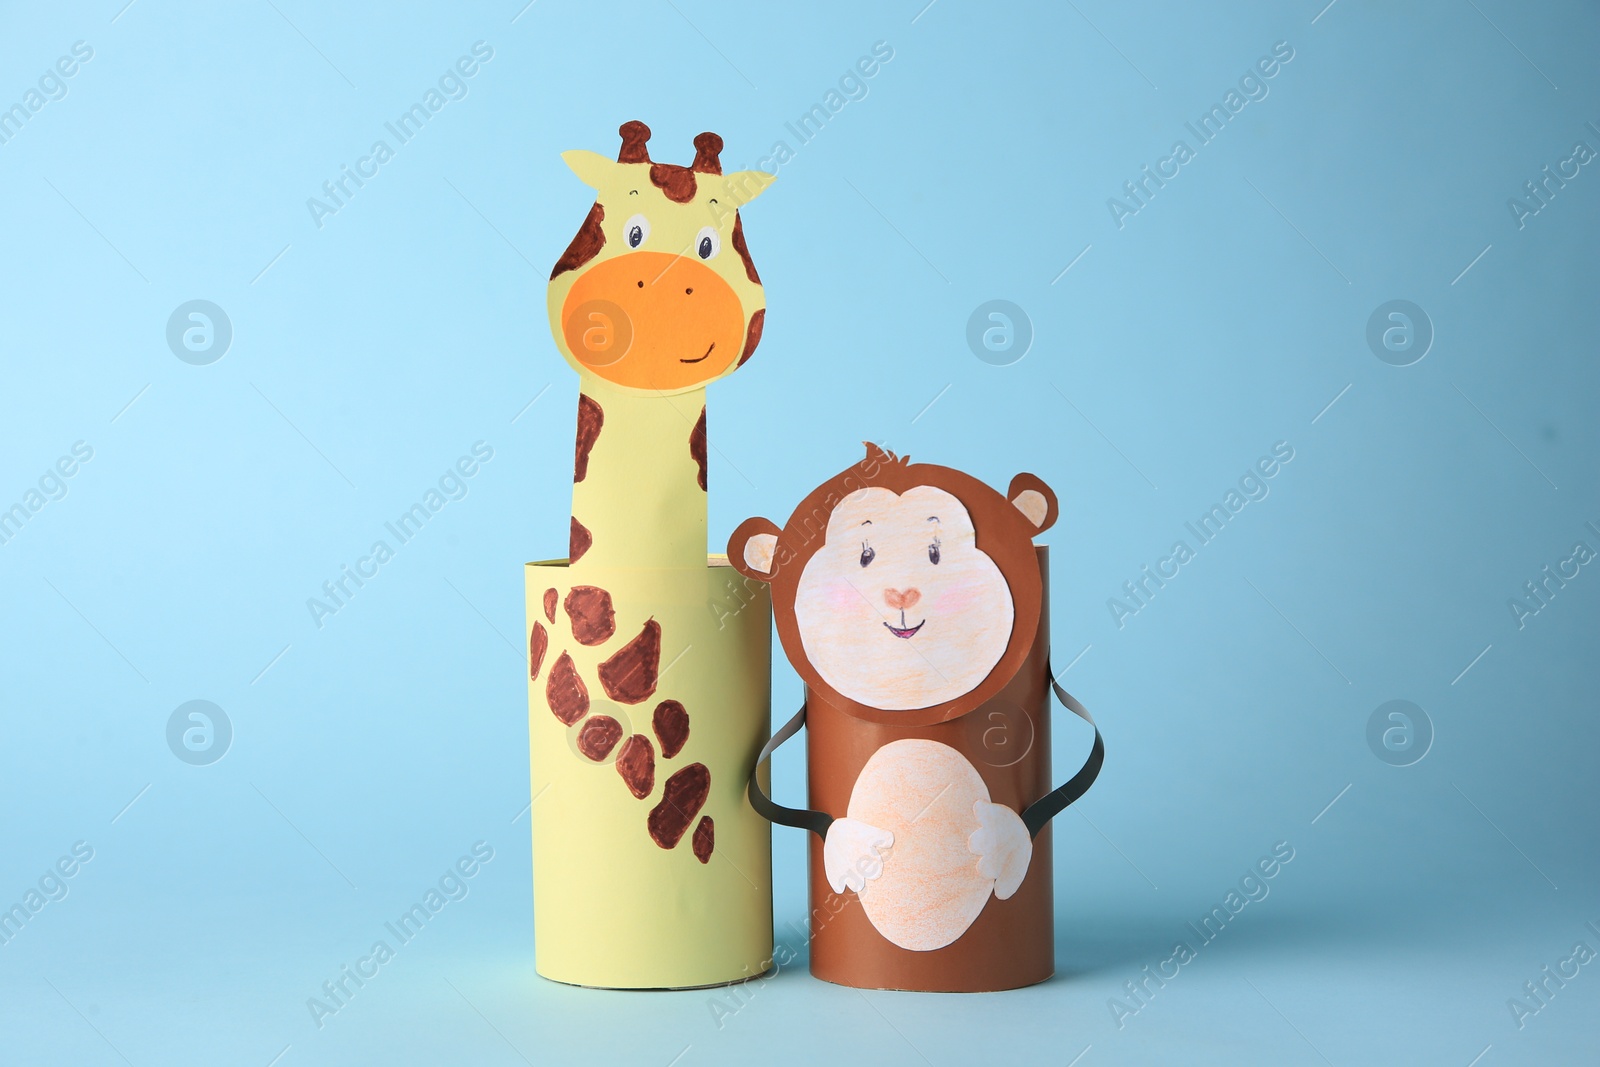 Photo of Toy monkey and giraffe made from toilet paper hubs on light blue background. Children's handmade ideas